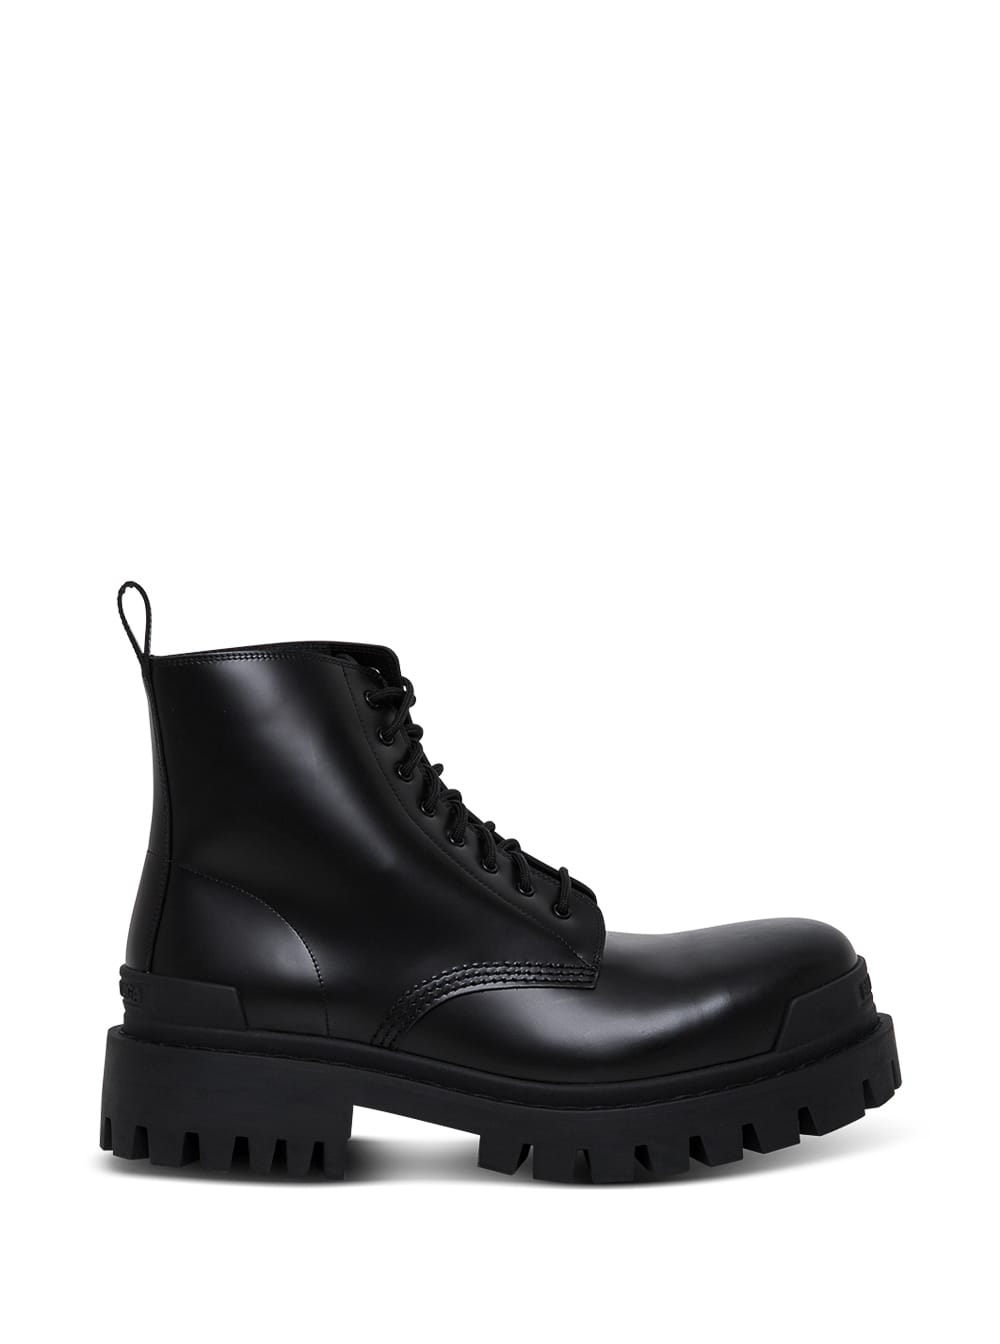 Balenciaga Strike Lace Up Boots In Black Leather